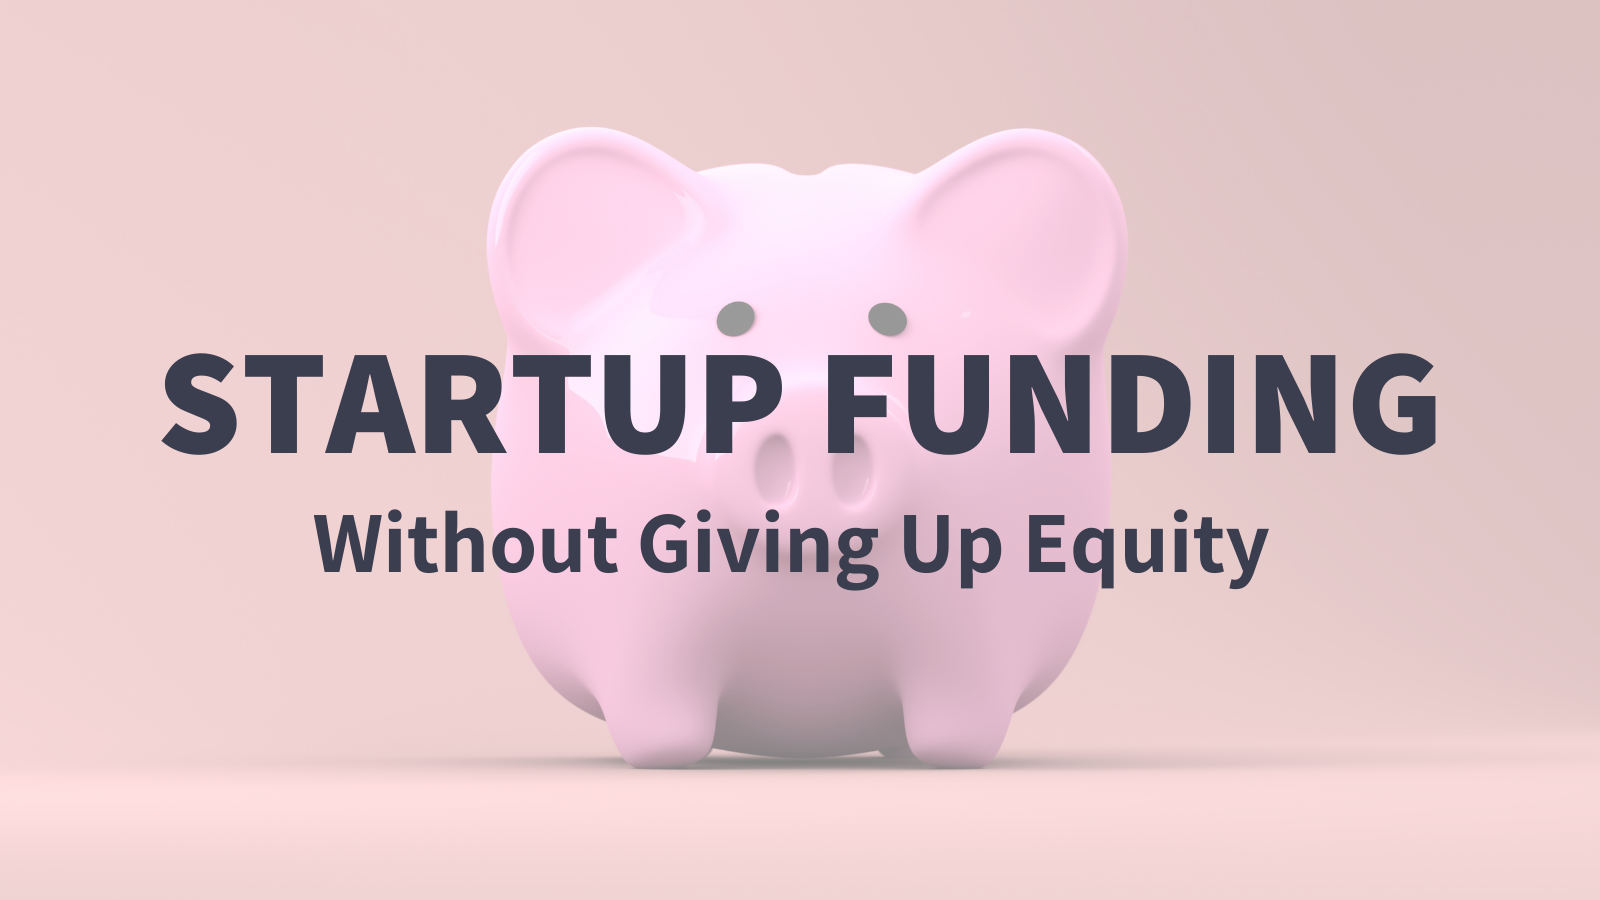 Startup Funding Without Giving Up Equity